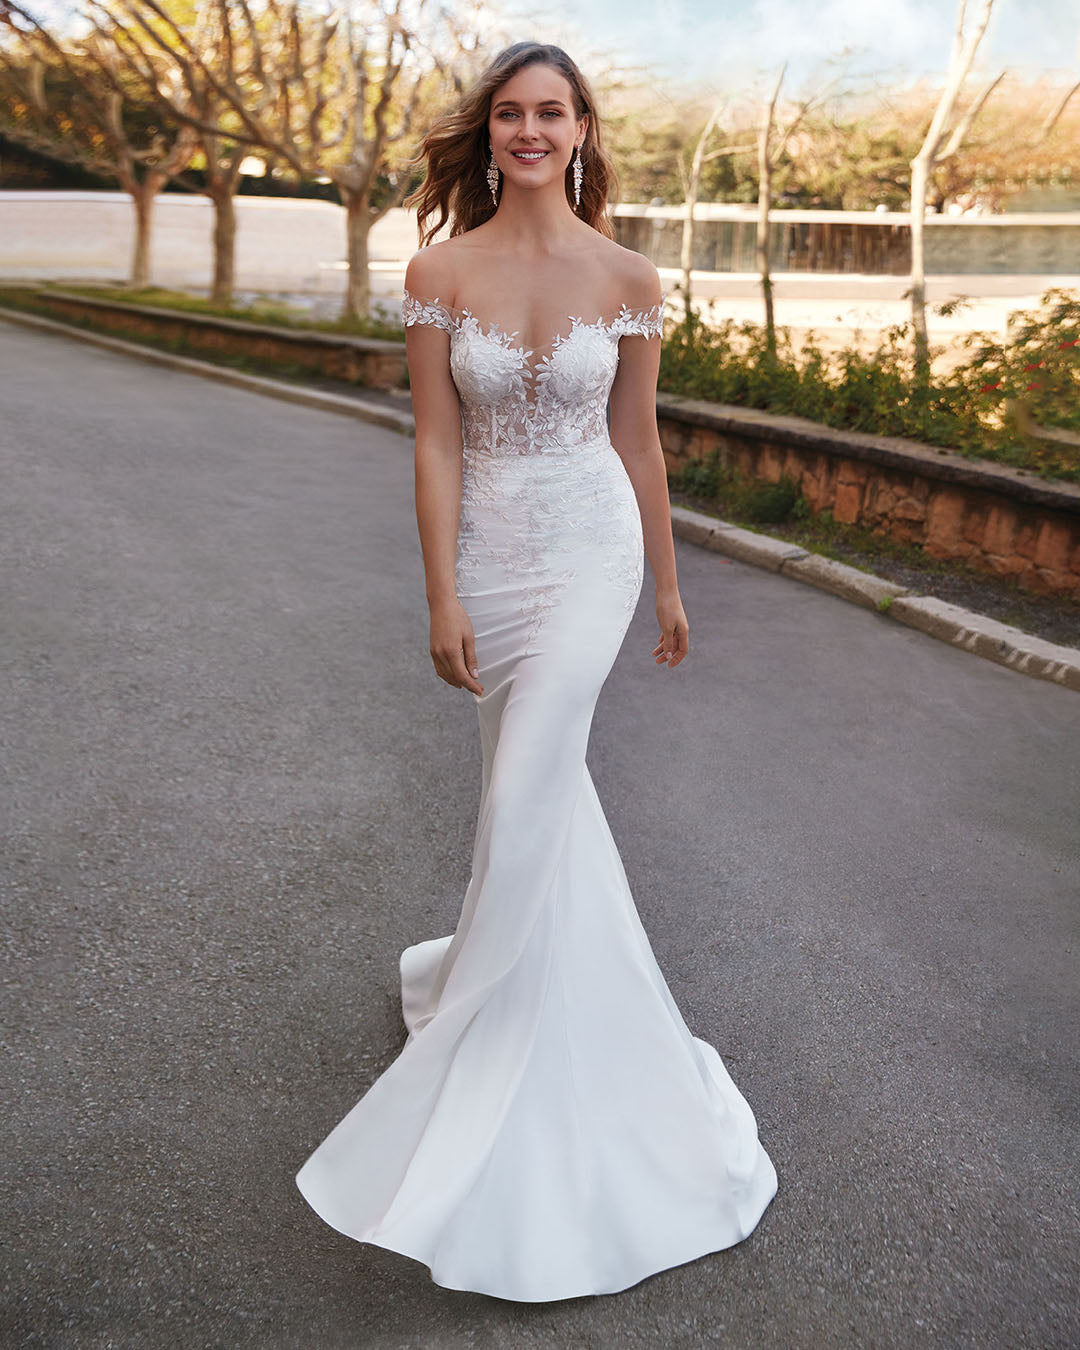 off the shoulder bridal gown with a sheer lace bodice